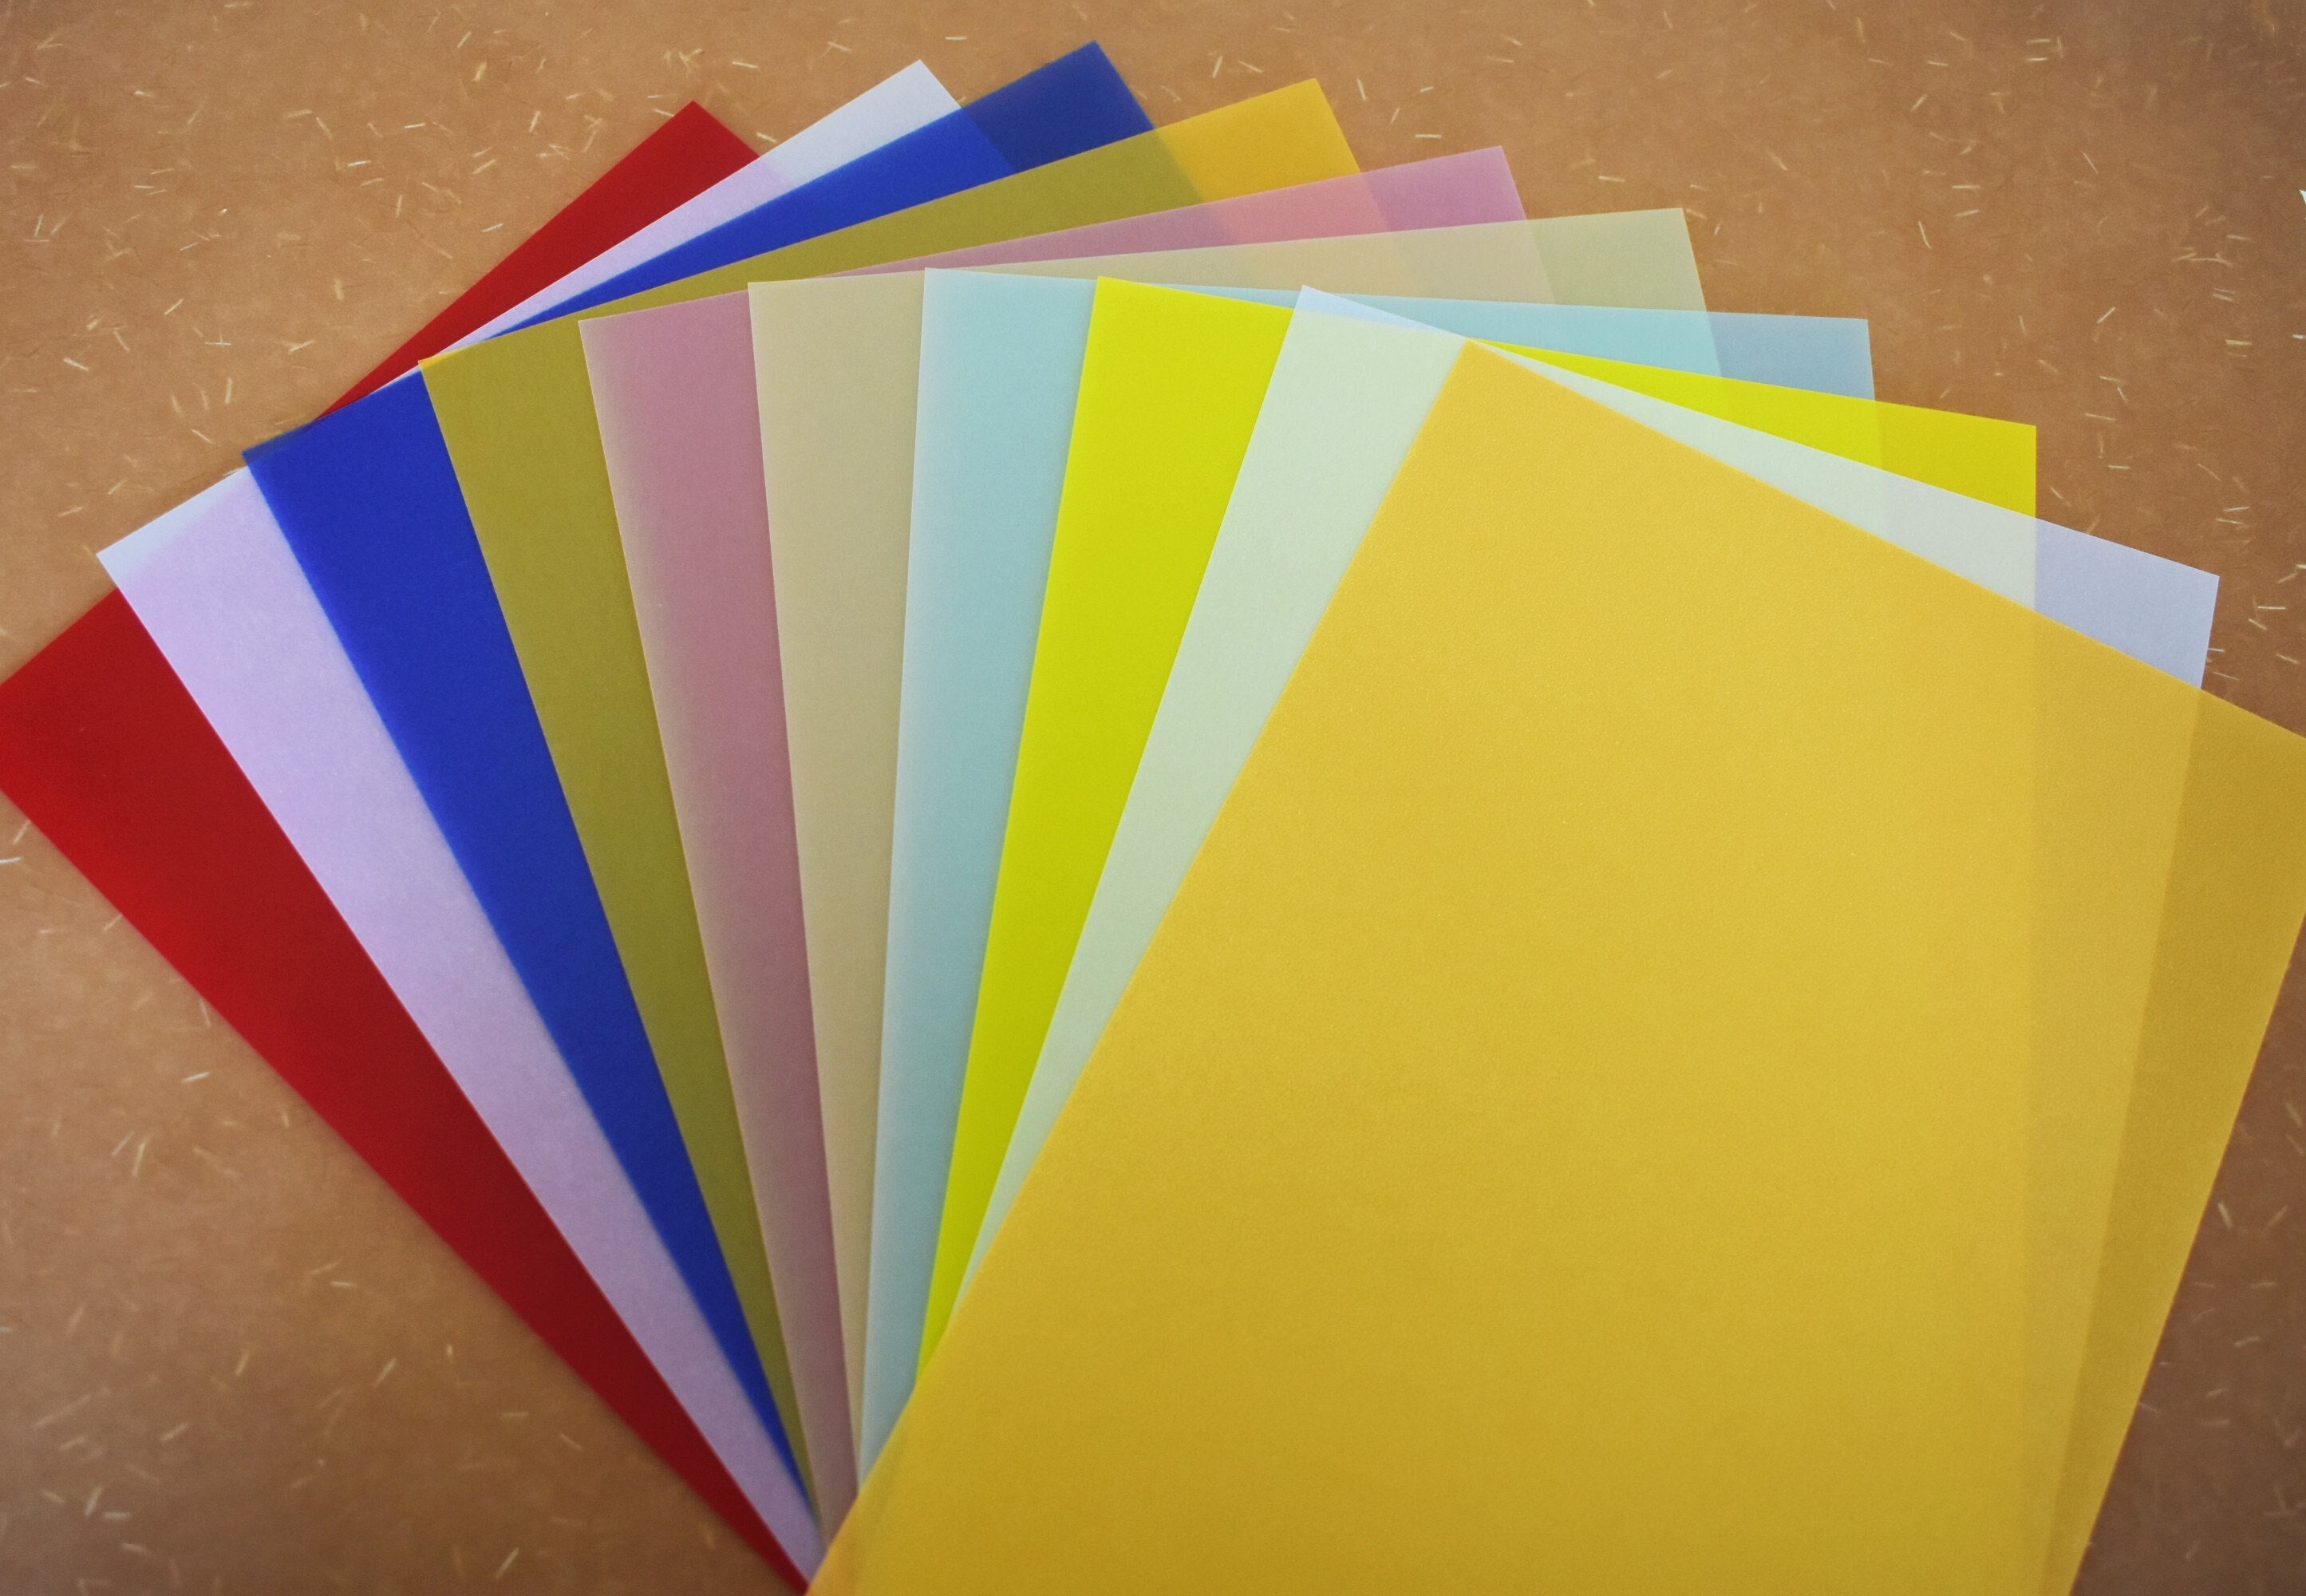 Translucent Vellum Paper for Invitations and Tracing (8.5 x 11 in